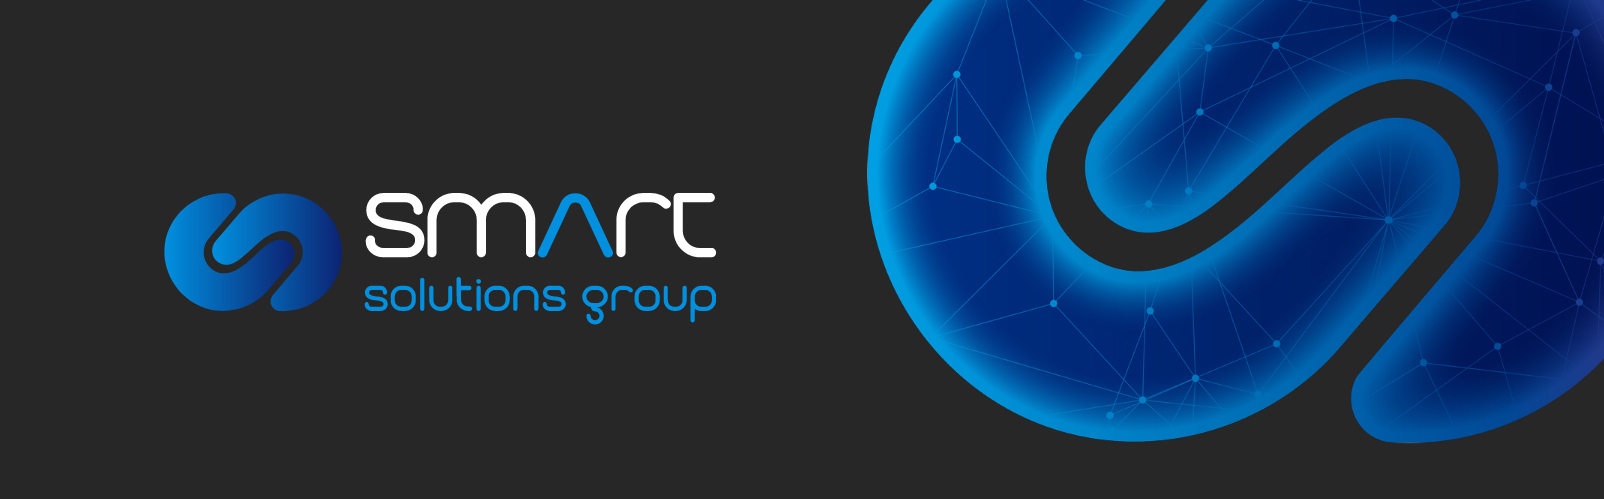 Smart Solutions Group Logo